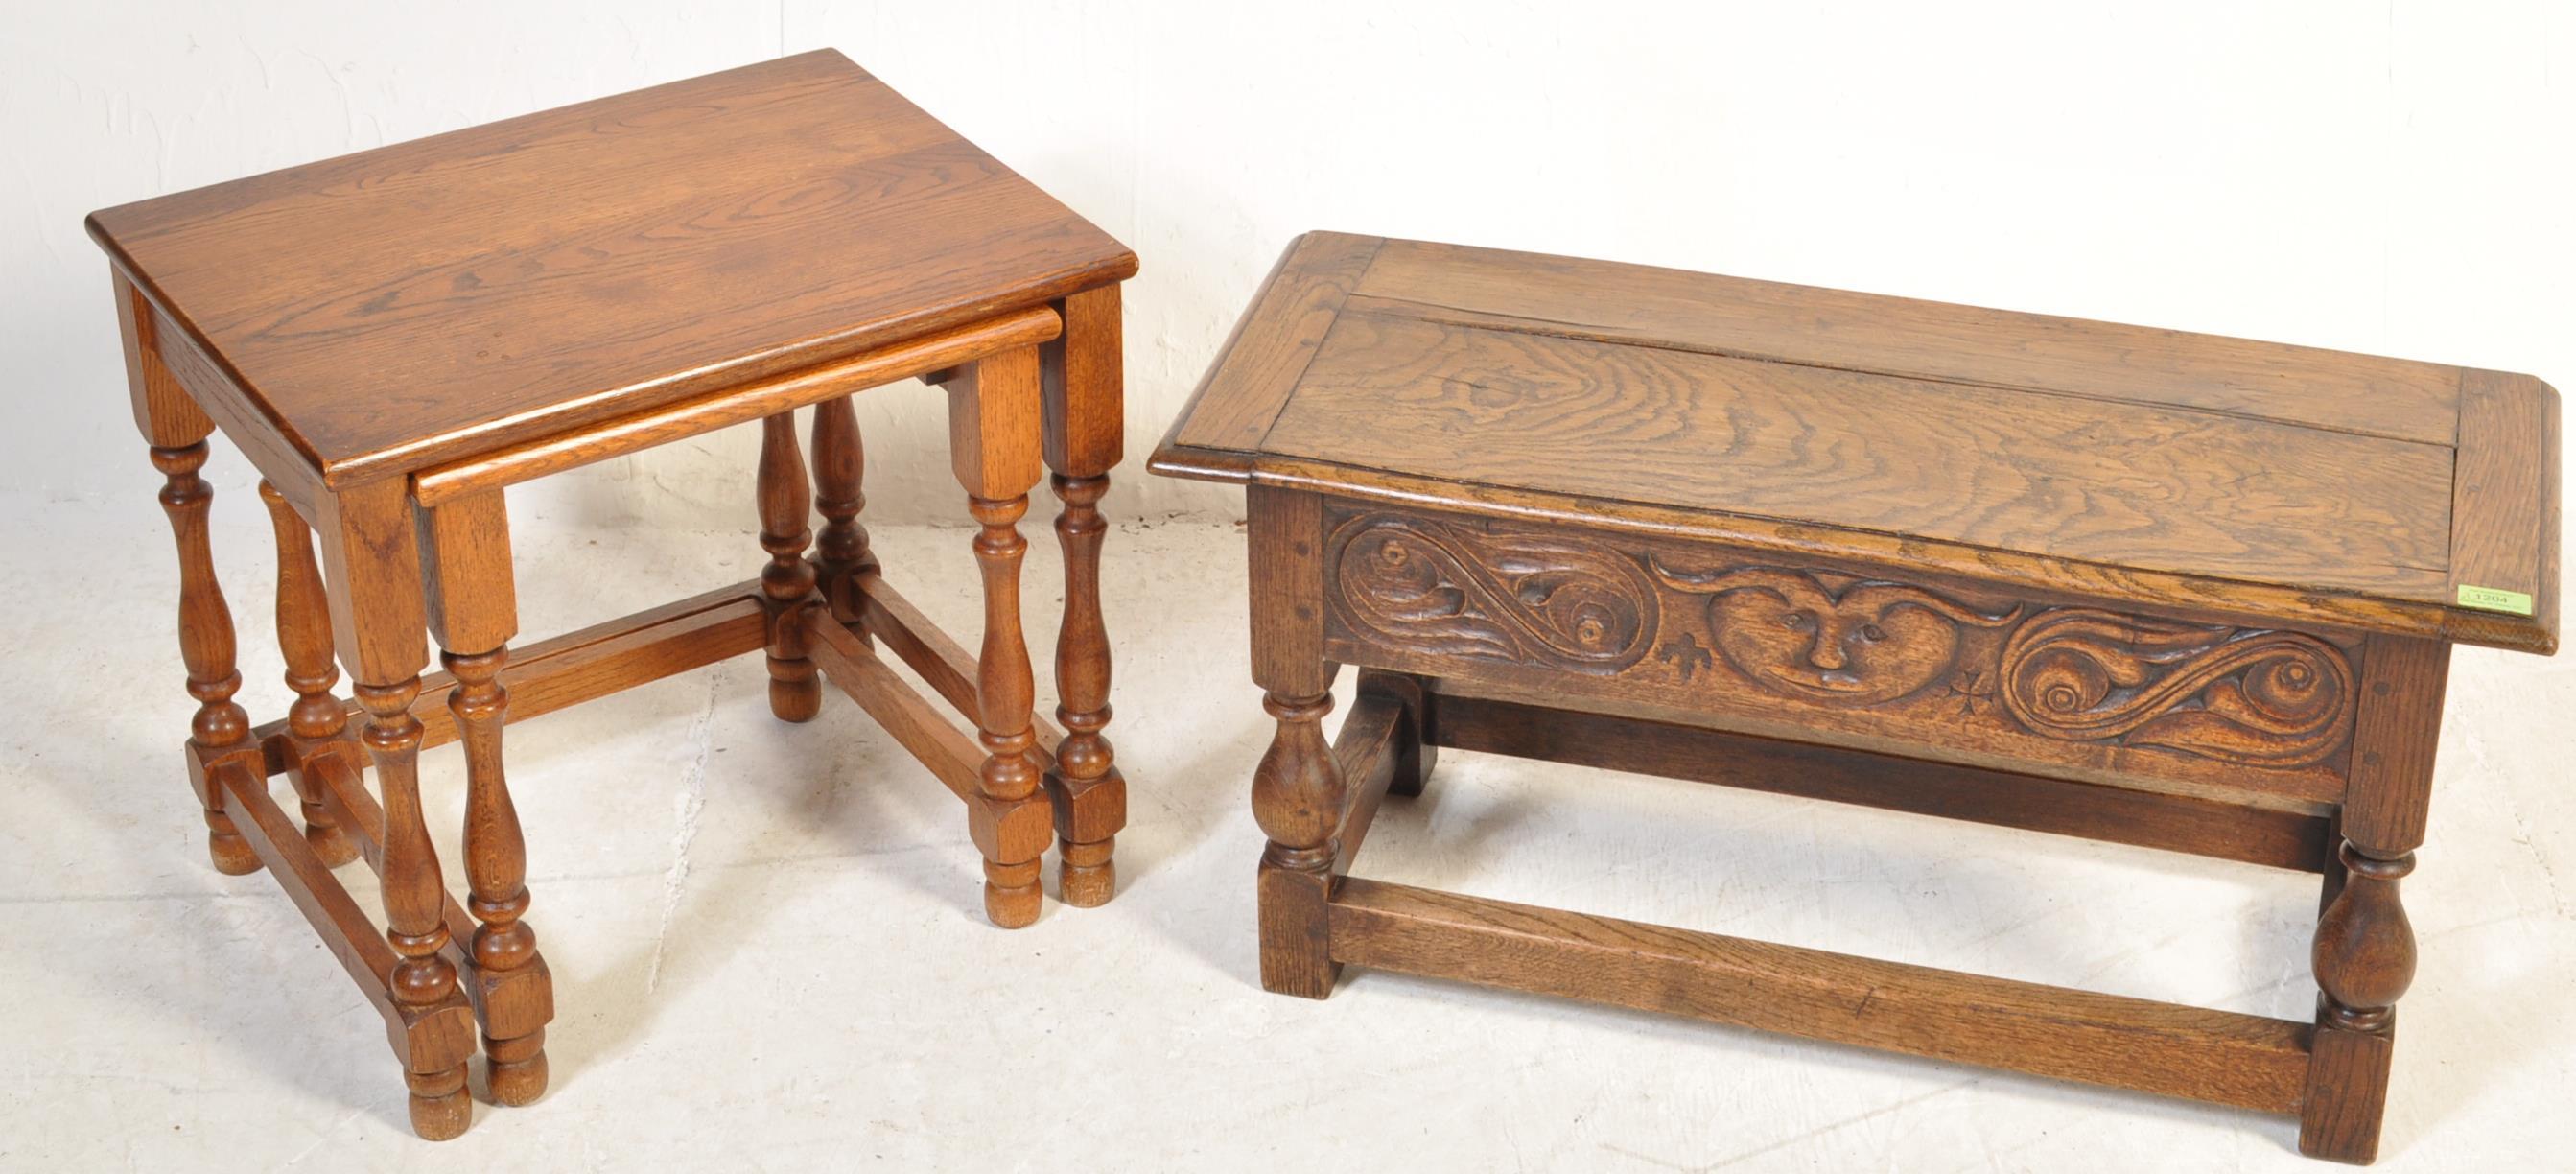 17TH CENTURY STYLE COFFER / BIBLE BOX ON STAND TOGETHER WITH A NEST OF TABLES - Image 2 of 6